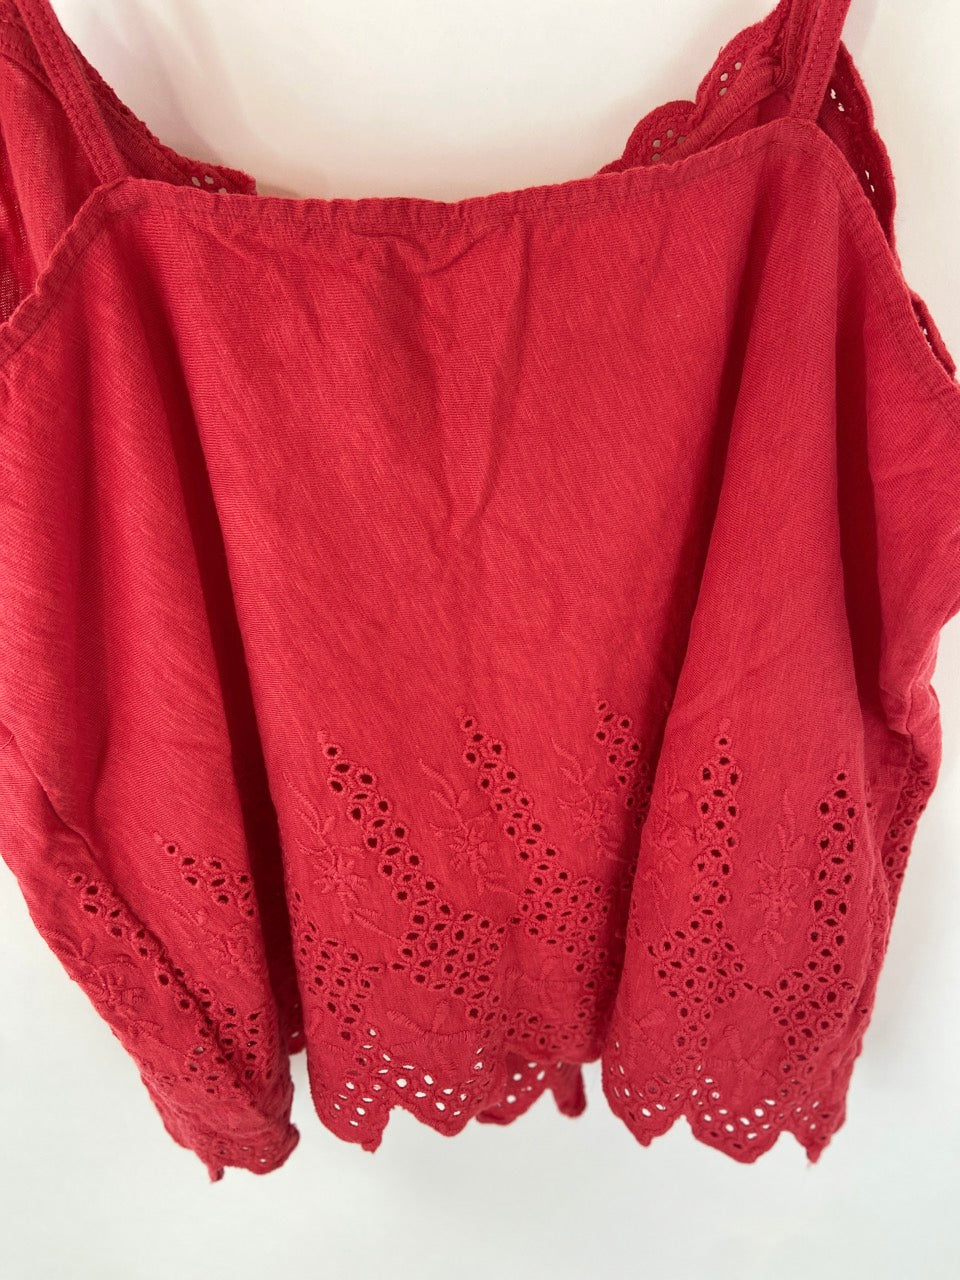 American Eagle Outfitters, Spaghetti Strap Red Lace Crop Top- M